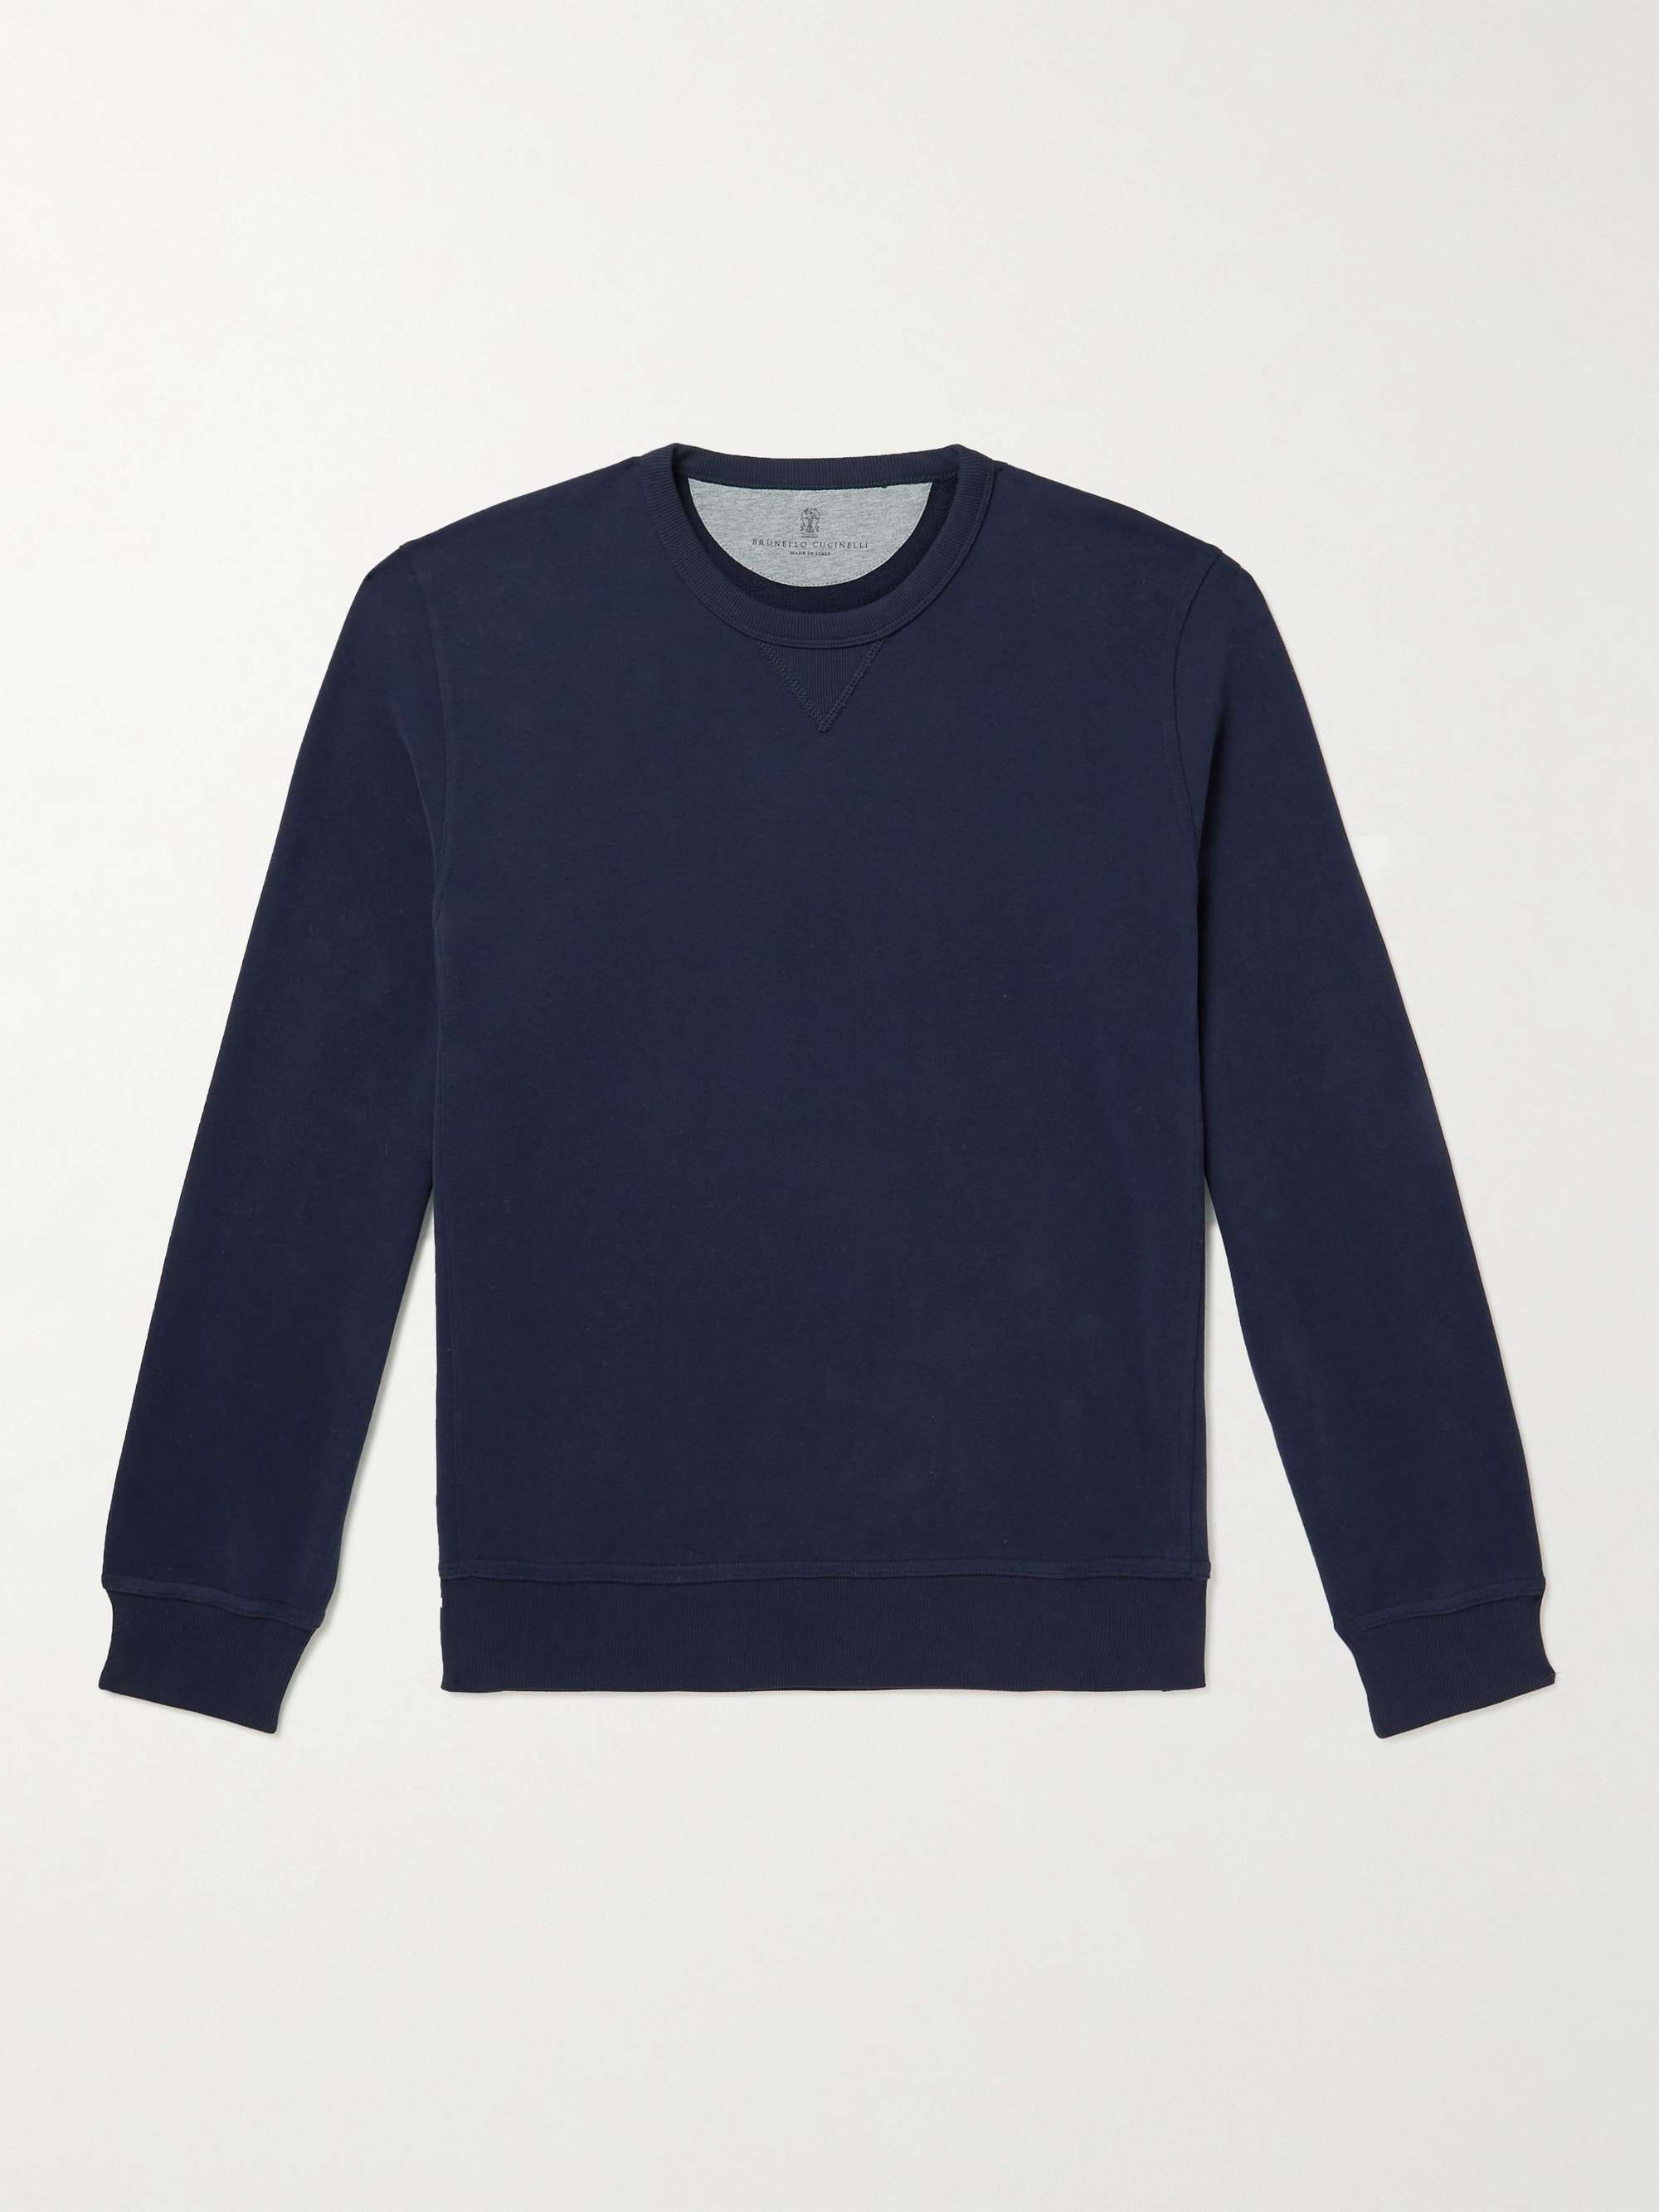 Brunello Cucinelli Contrast-trim Cotton Sweatshirt in Blue for Men Mens Clothing Activewear gym and workout clothes Sweatshirts 